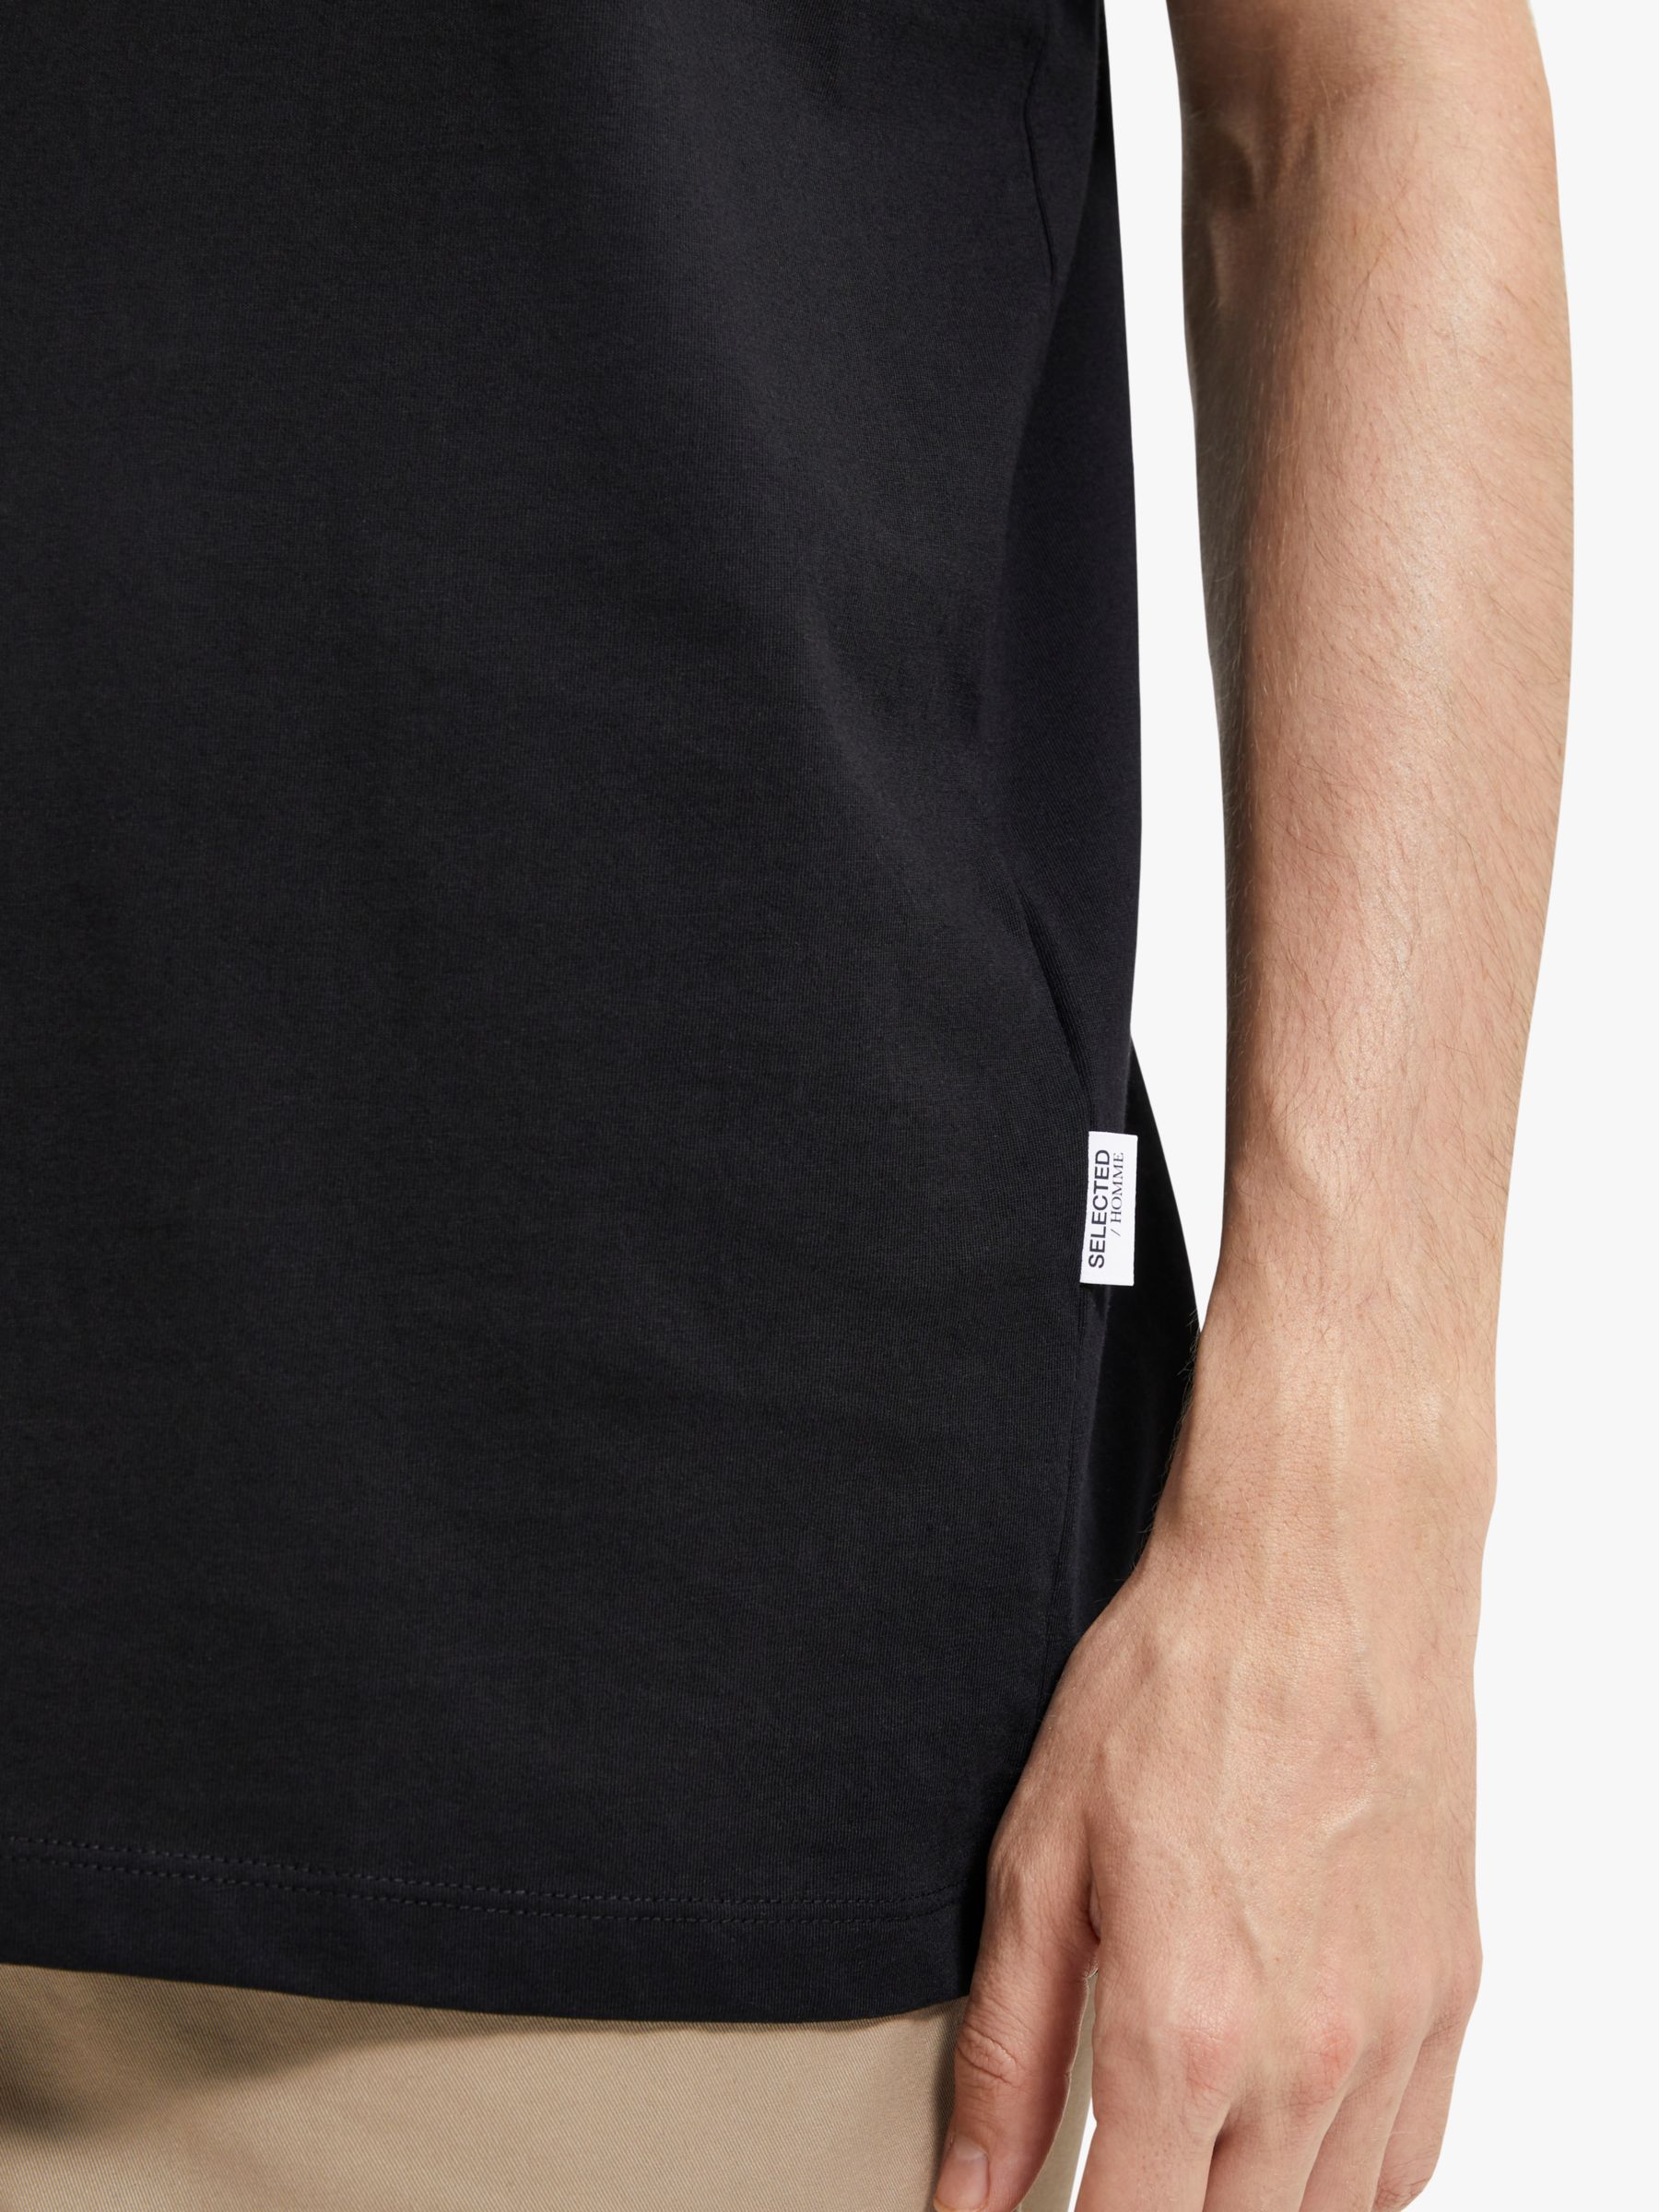 Buy SELECTED HOMME Organic Cotton T-Shirt Online at johnlewis.com